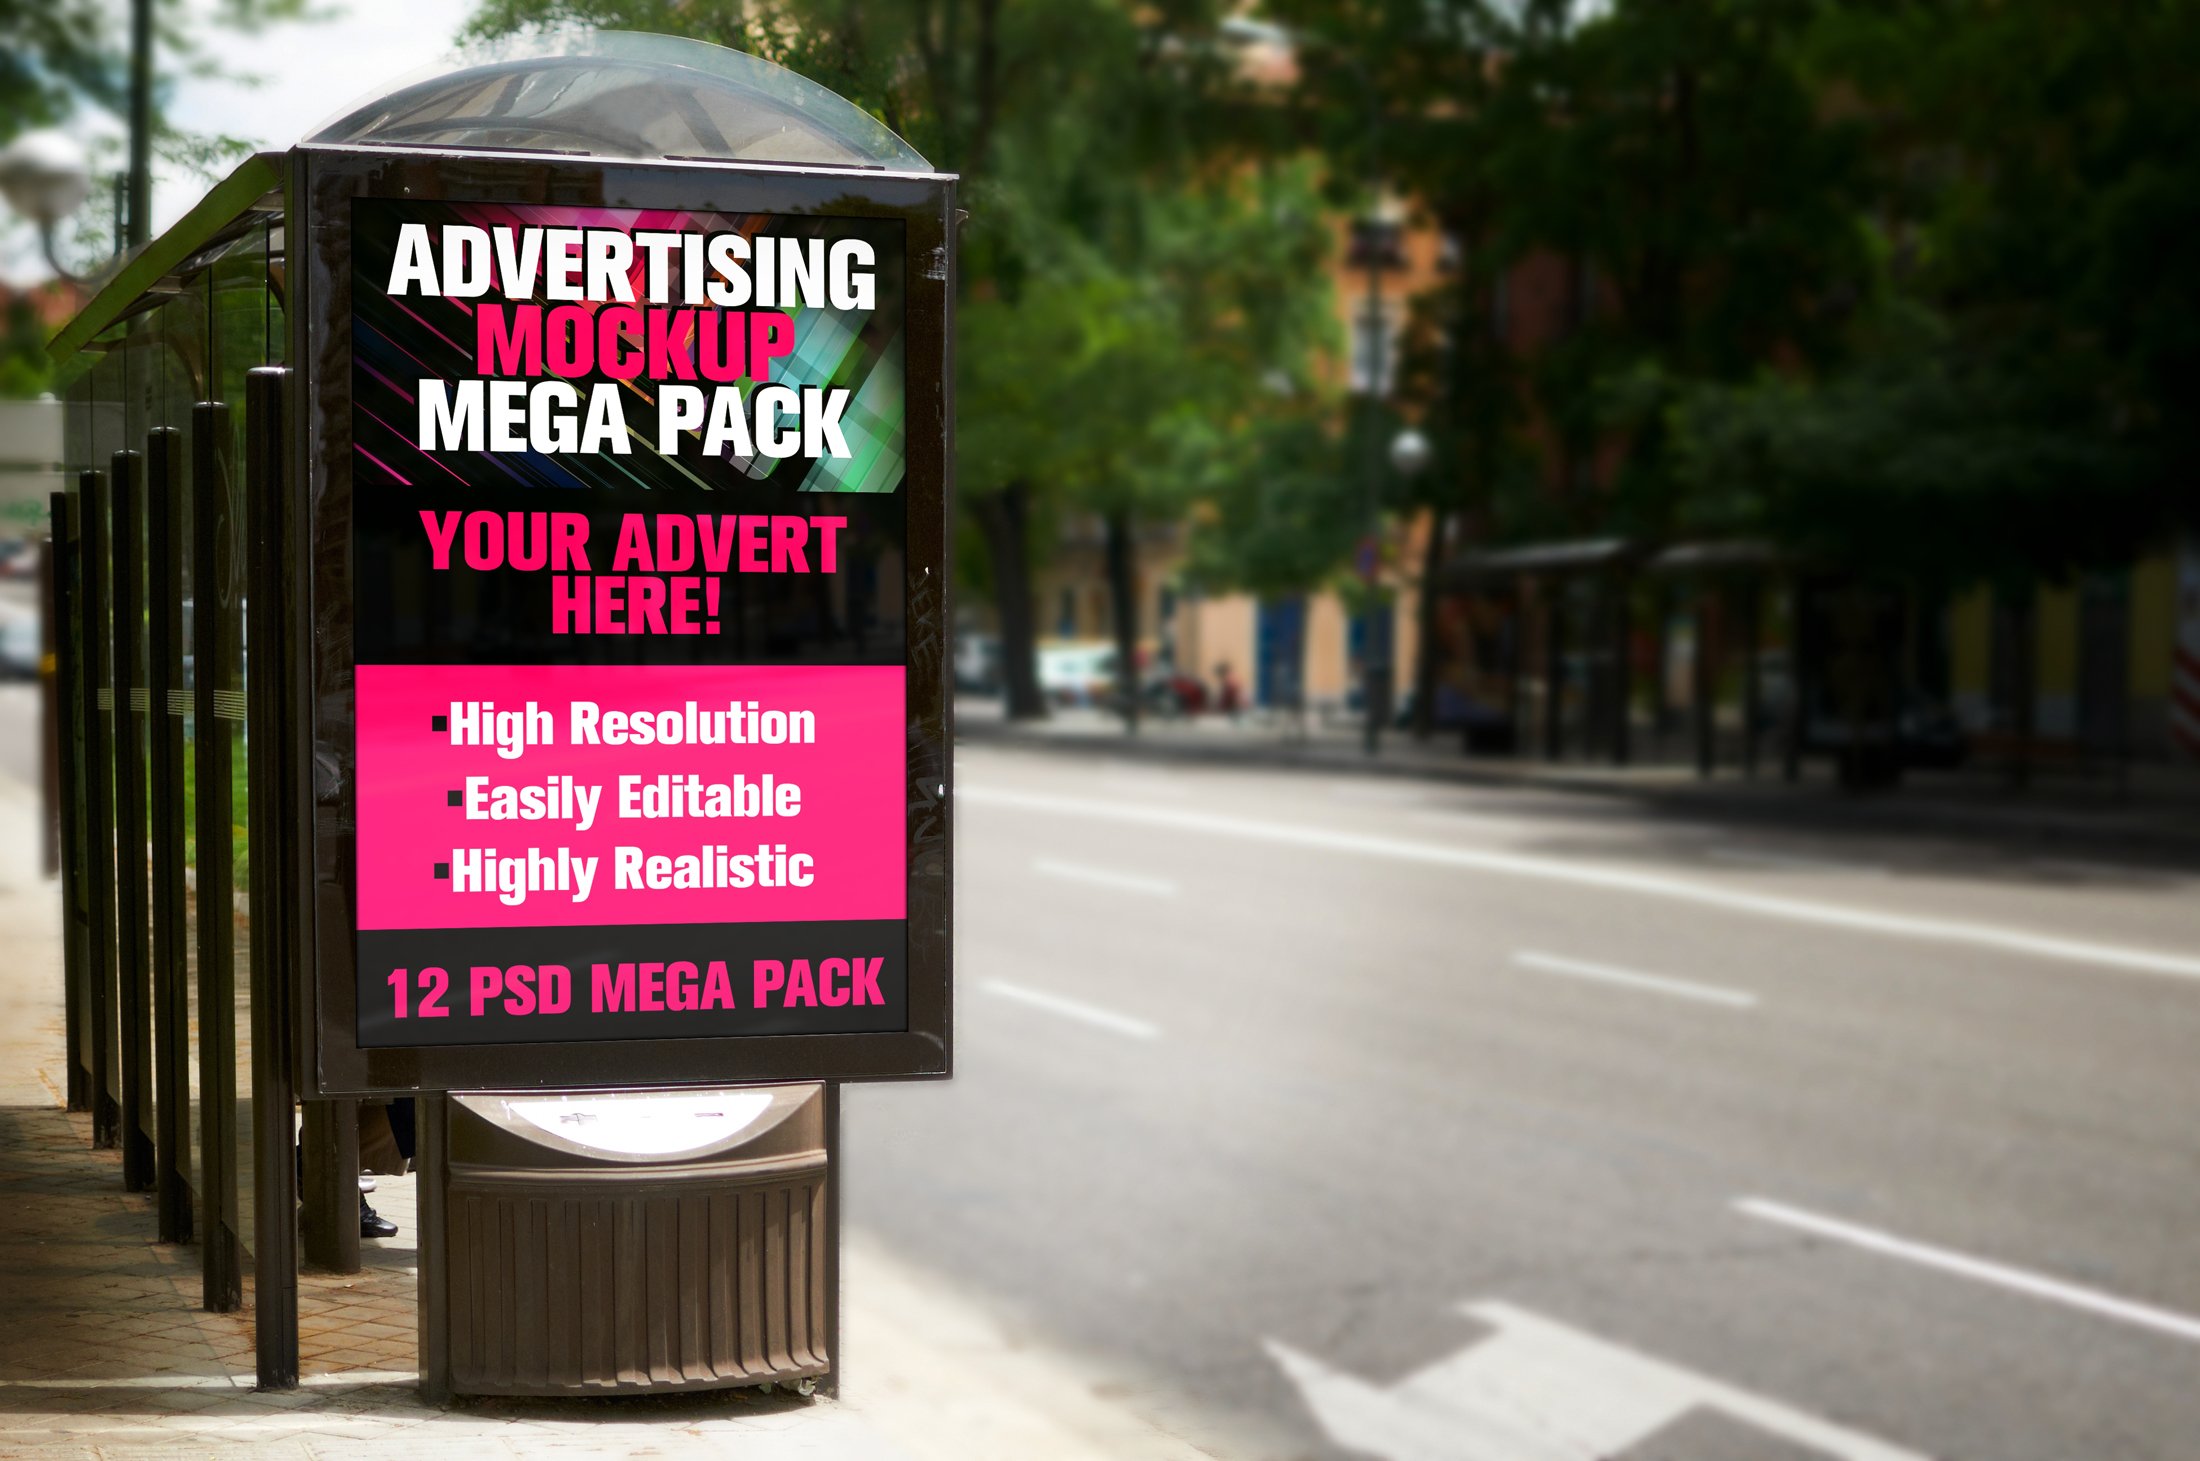 Advertising Mockup cover image.